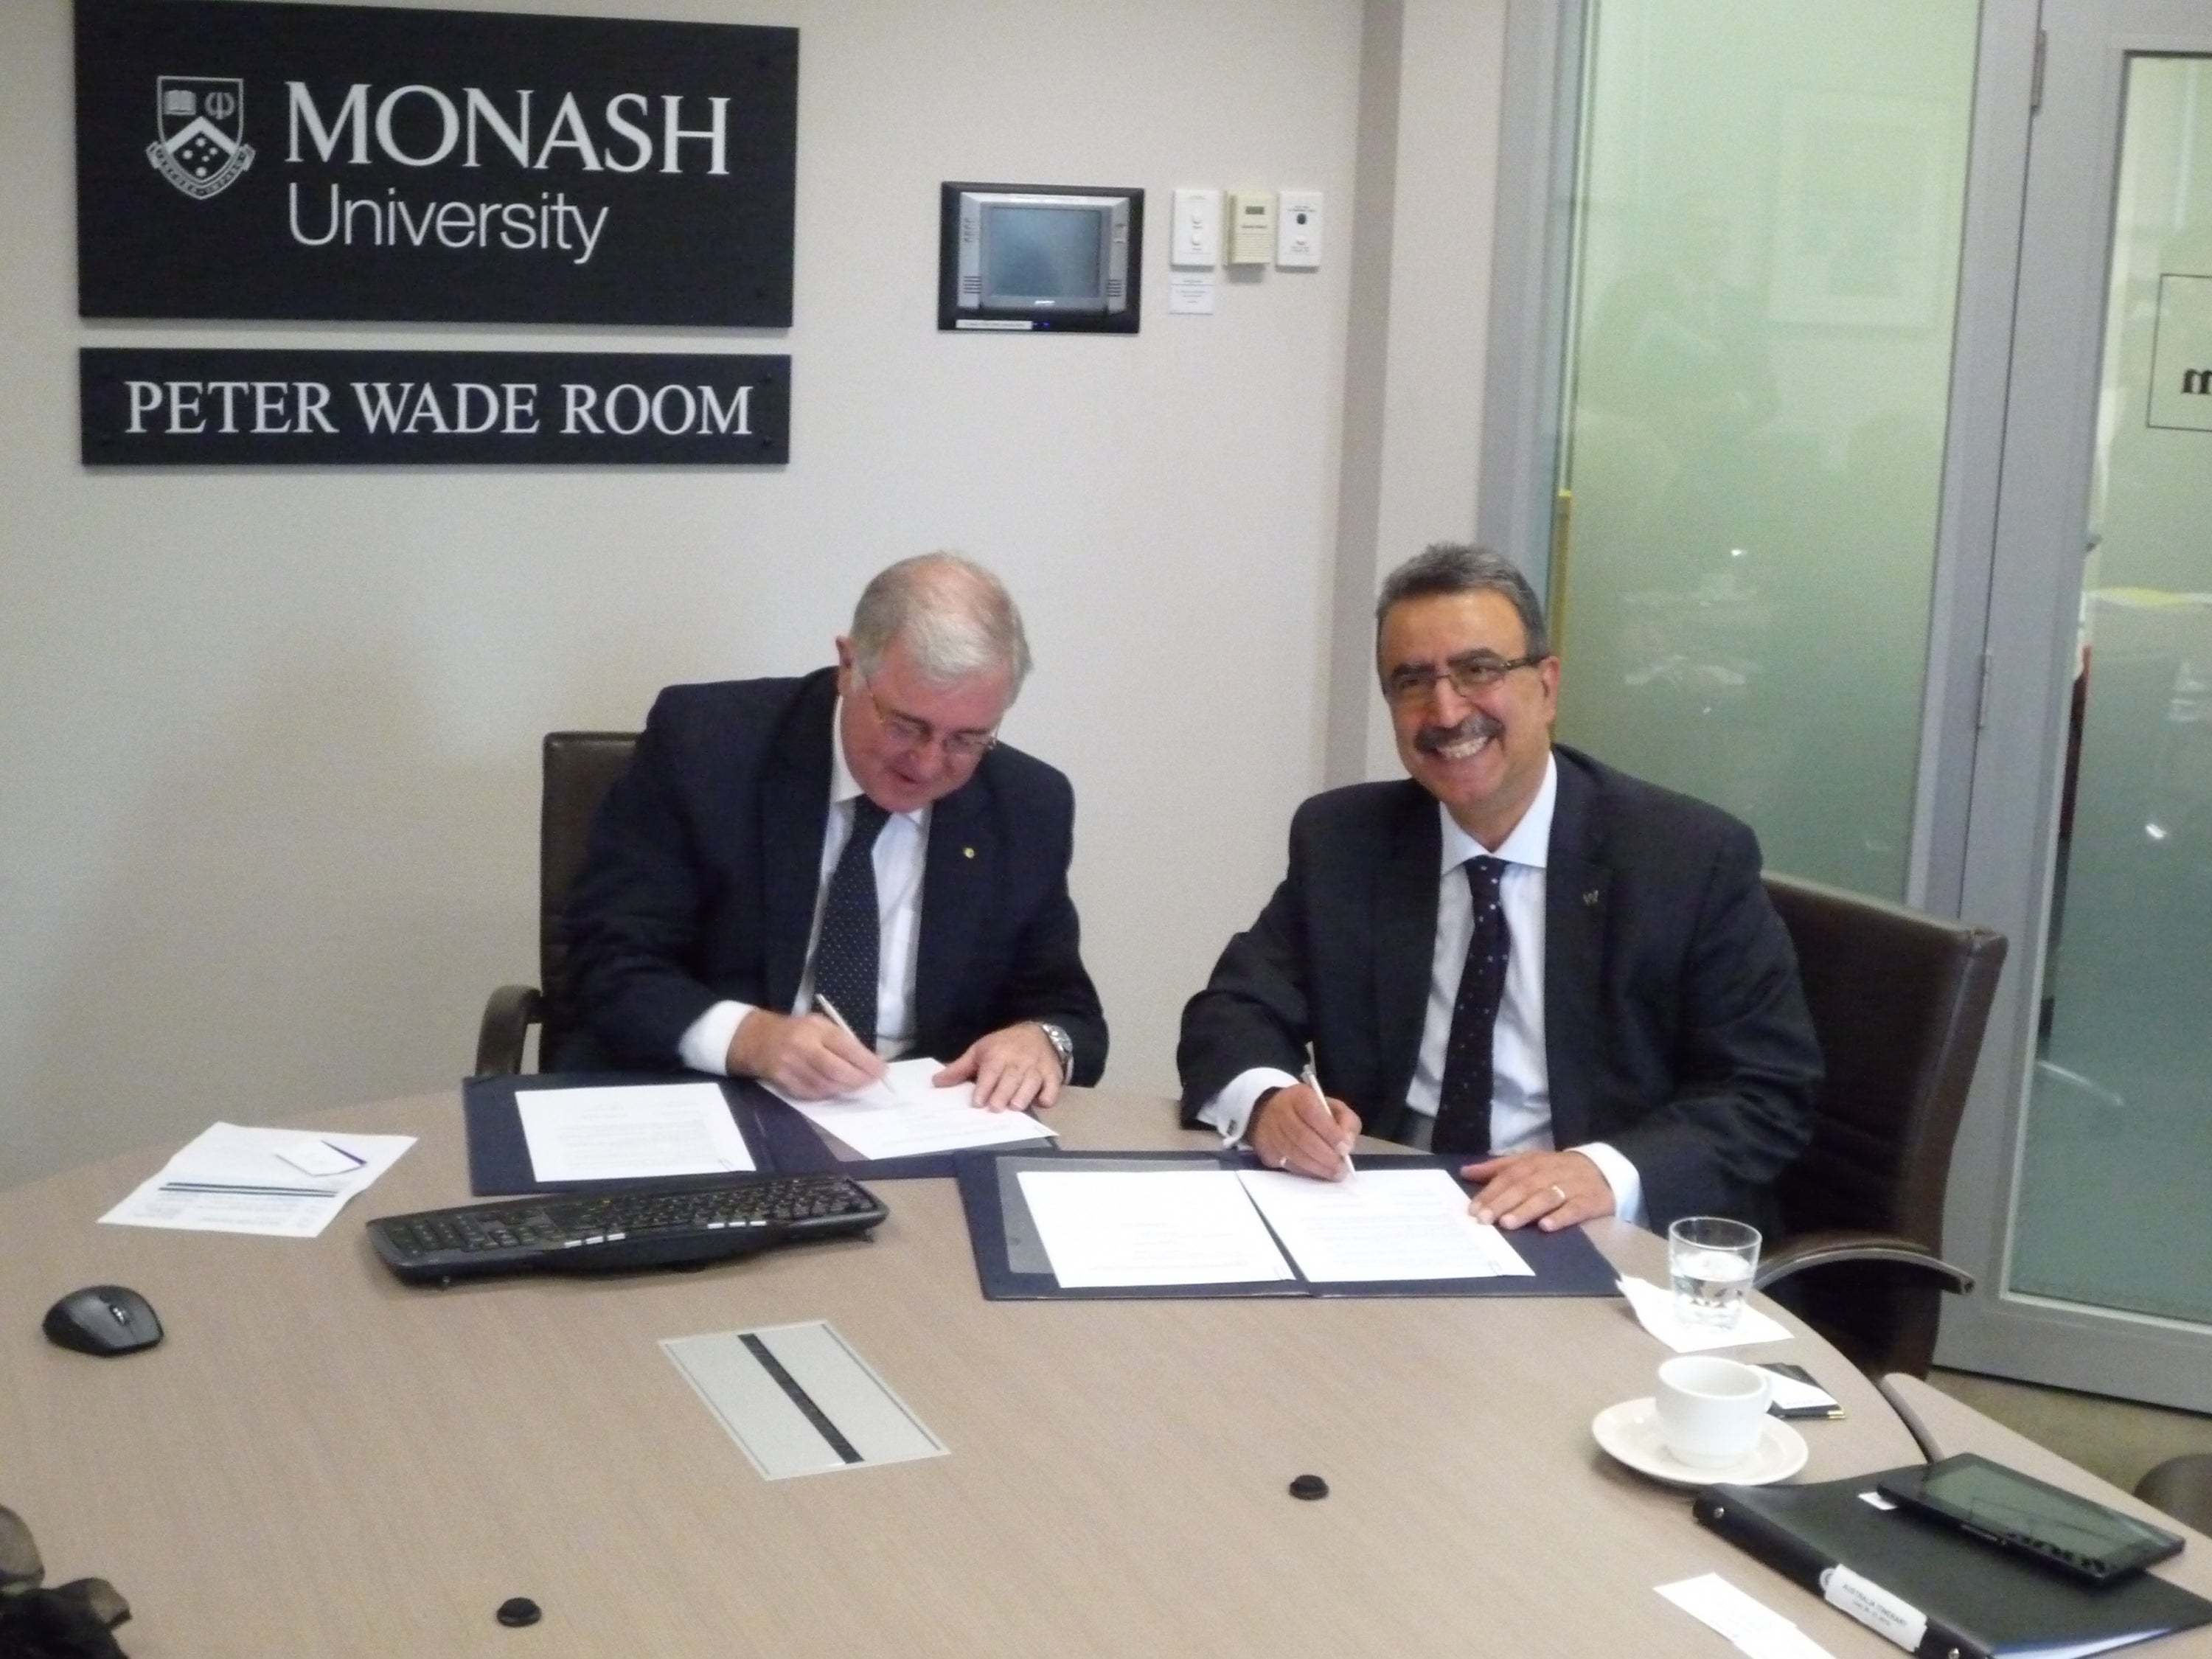 President Hamdullahpur and Vice-Chacenllor Byrne of Monash University sign MOU extension.